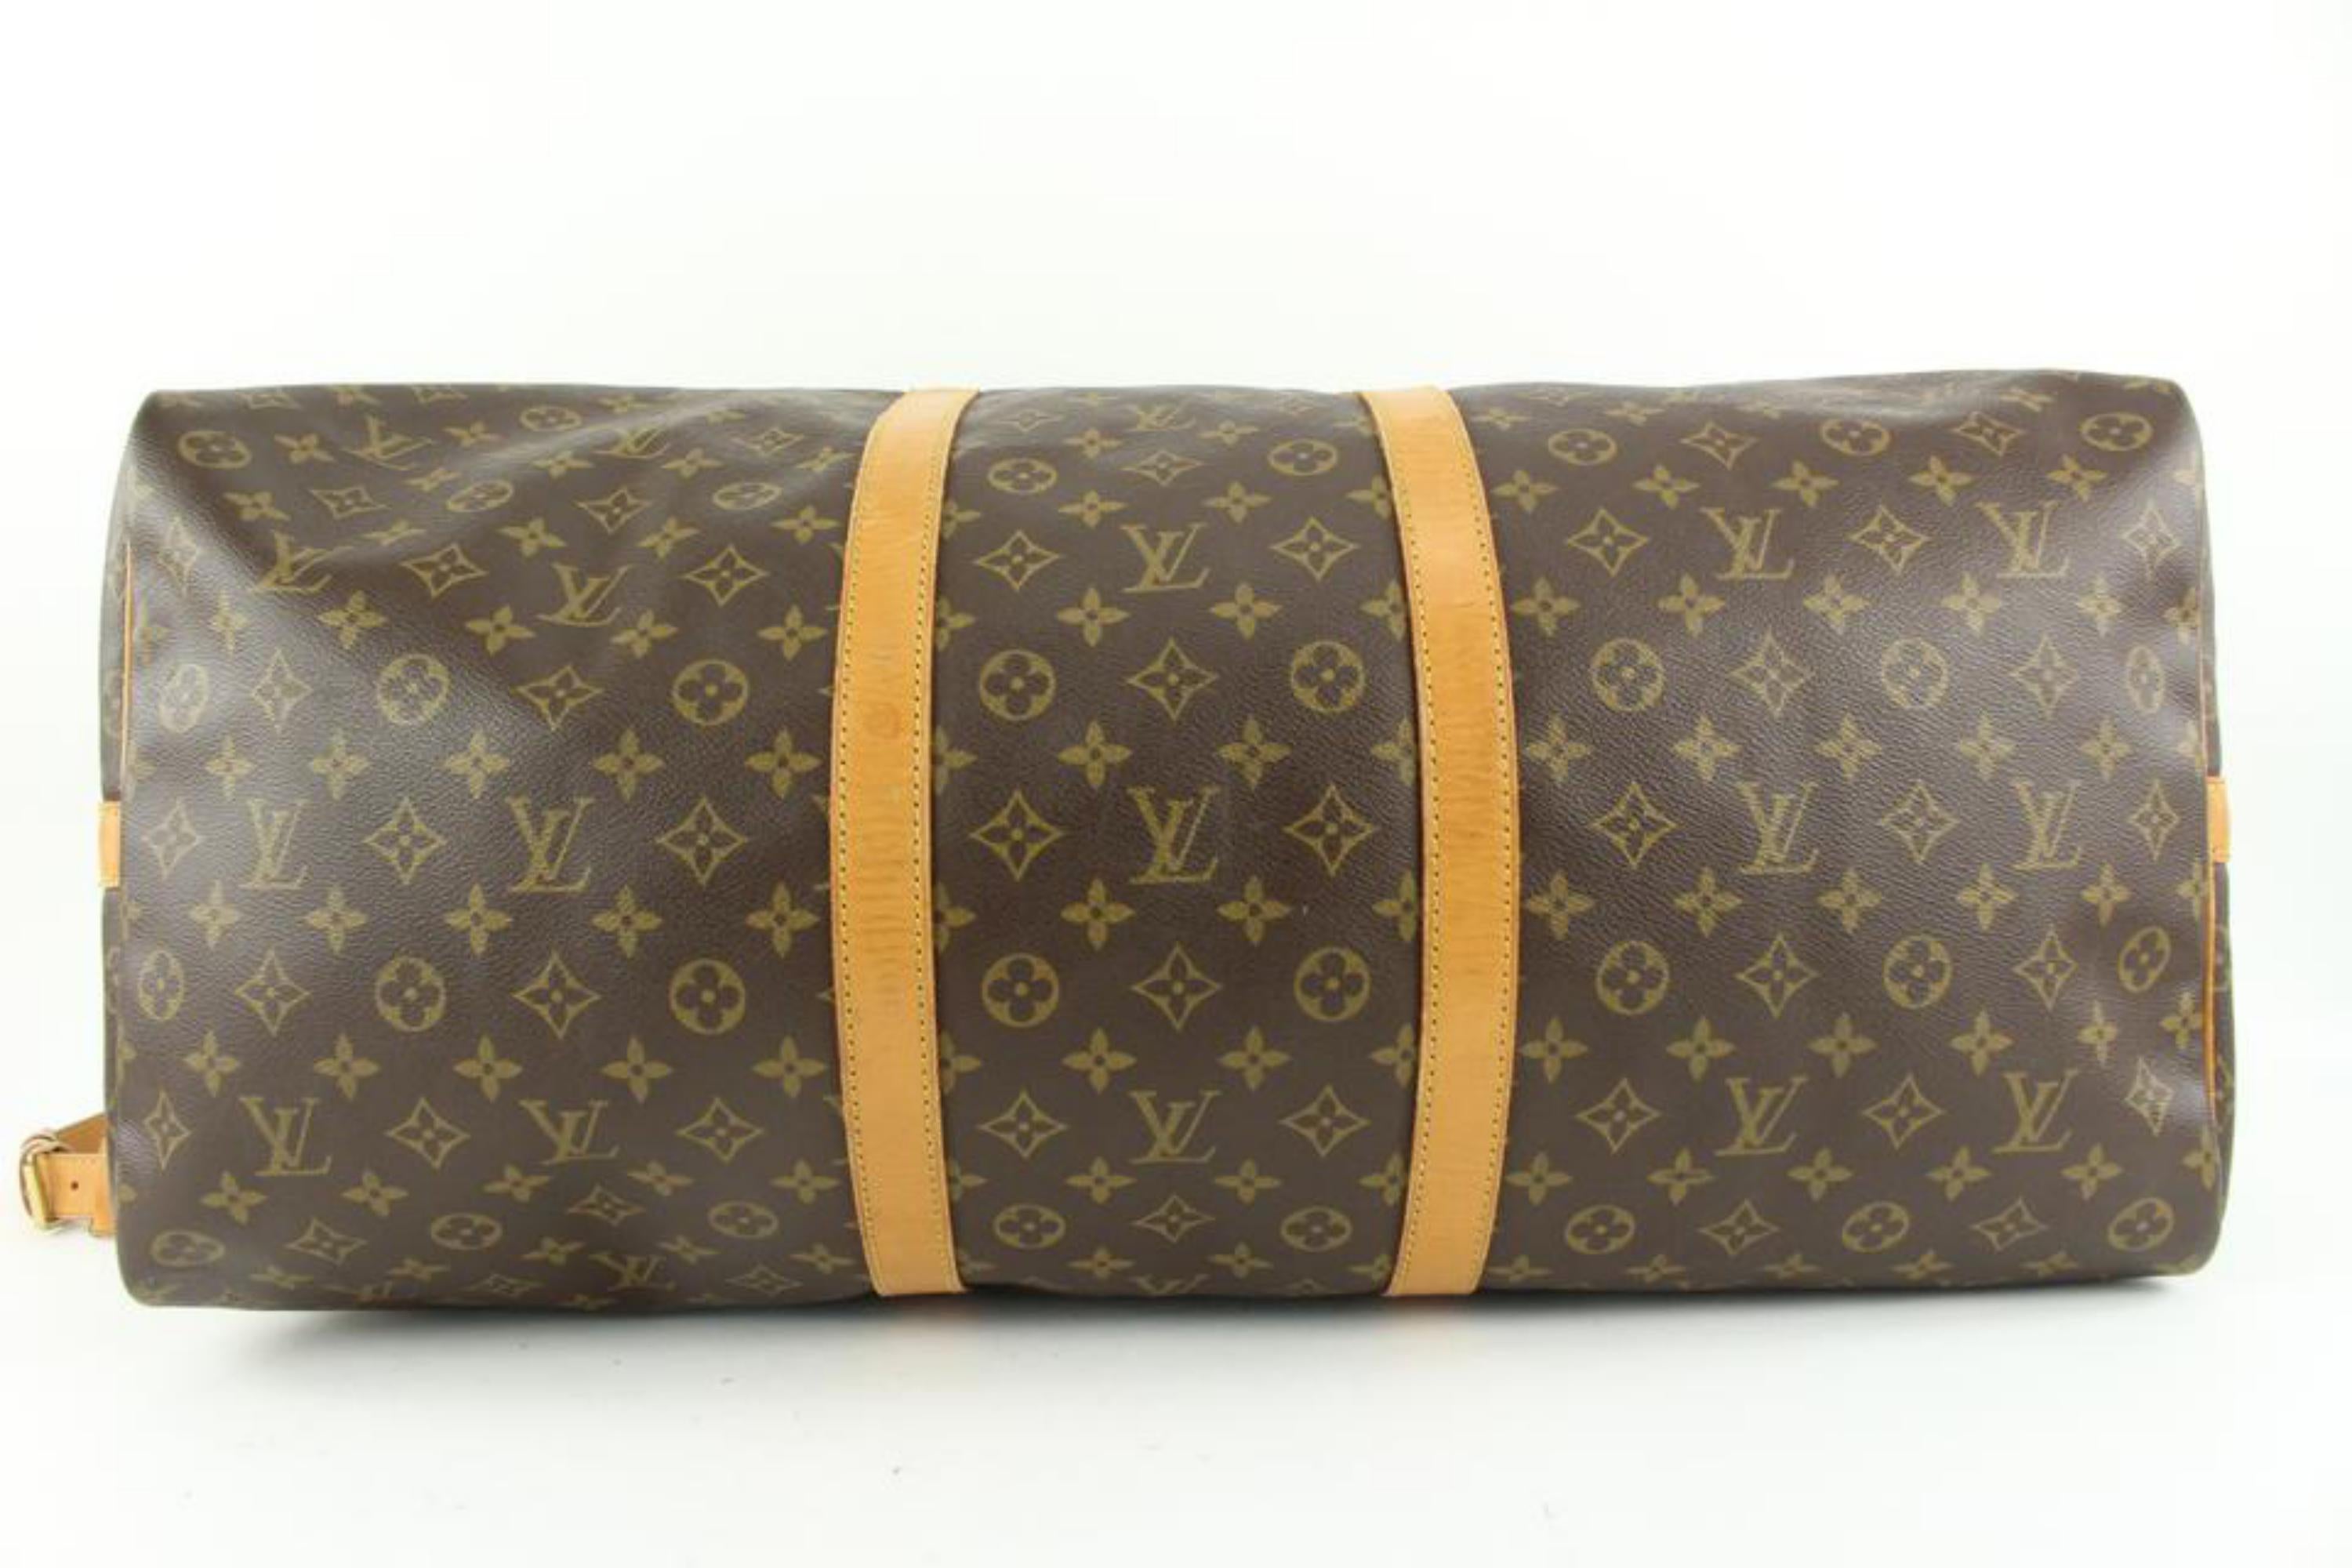 Louis Vuitton Large Monogram Keepall Bandouliere 60 Duffle with Strap 110lv55 For Sale 5